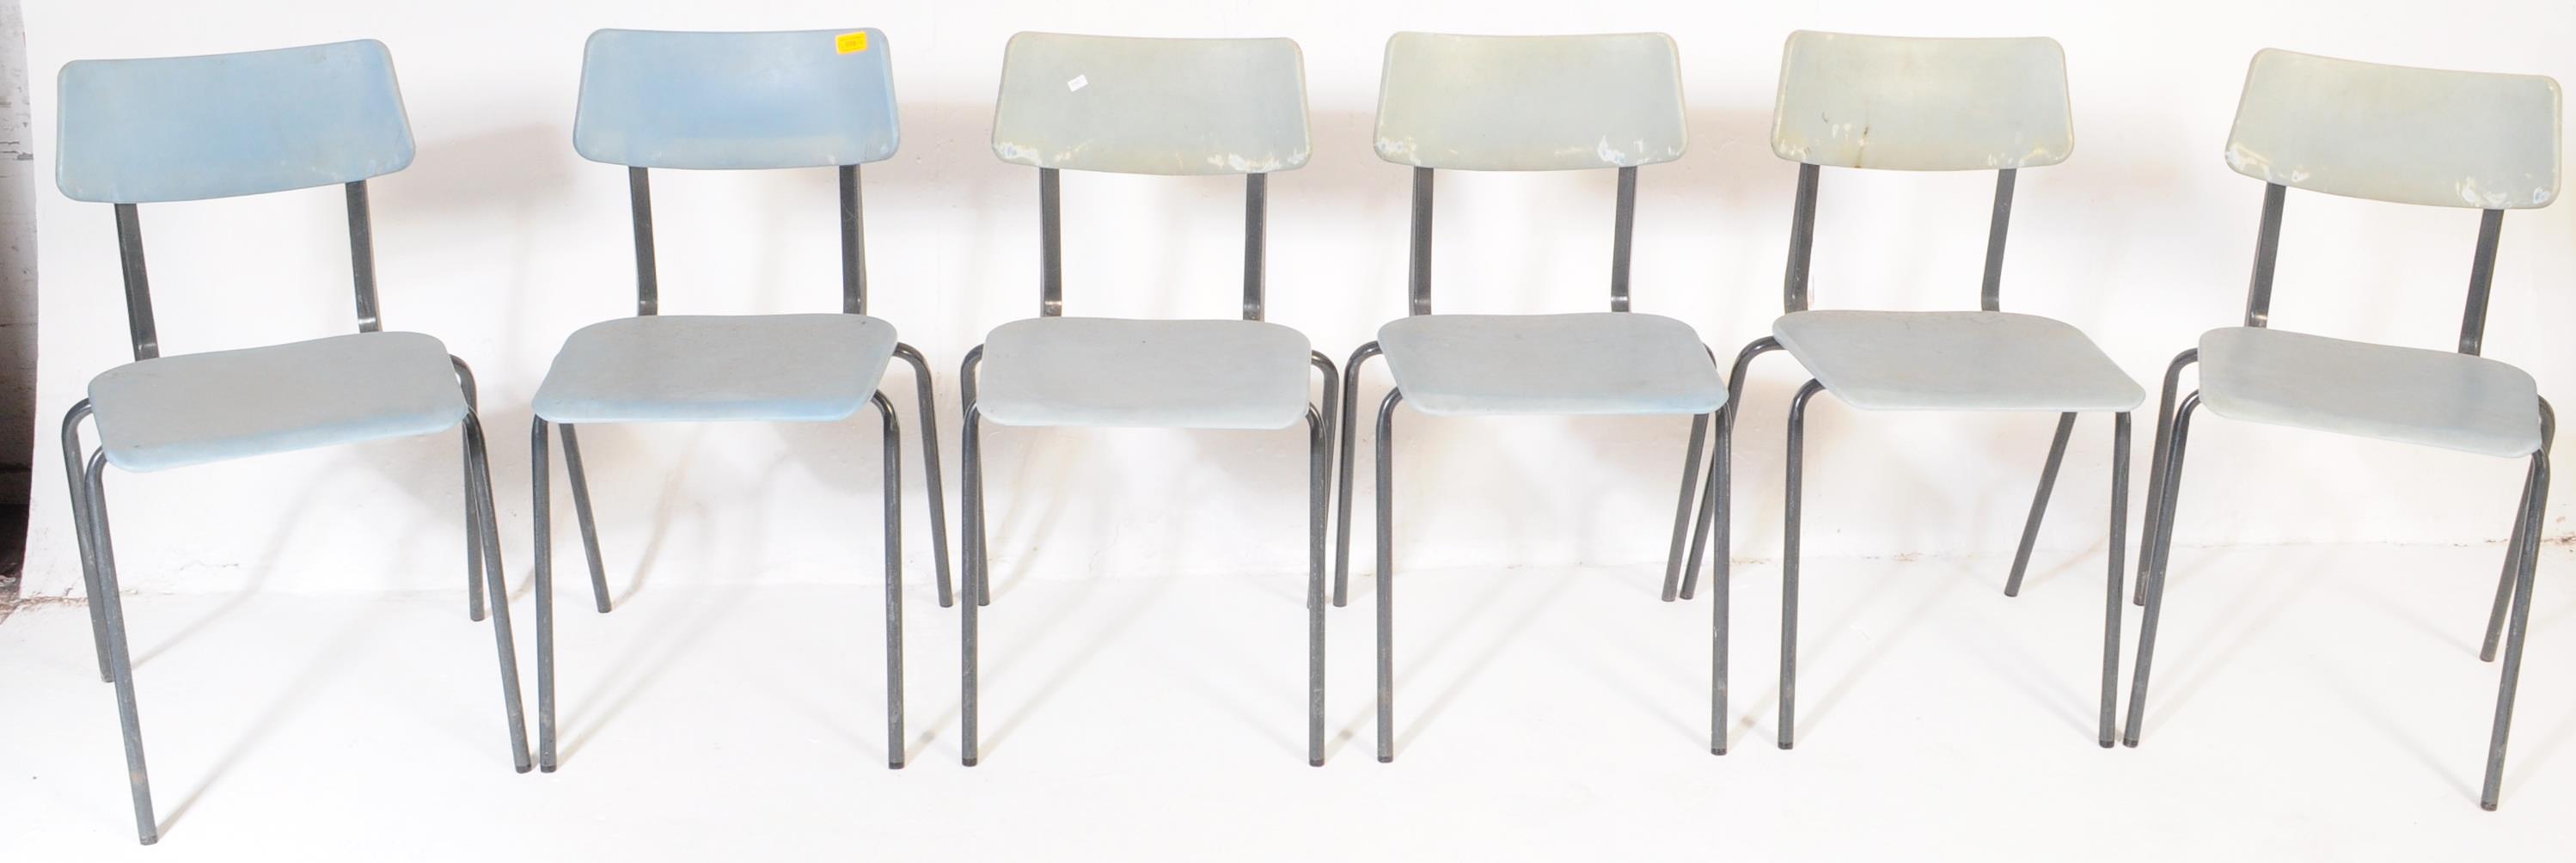 SET OF SIX RETRO VINTAGE 20TH CENTURY STACKING CHAIRS - Image 2 of 5